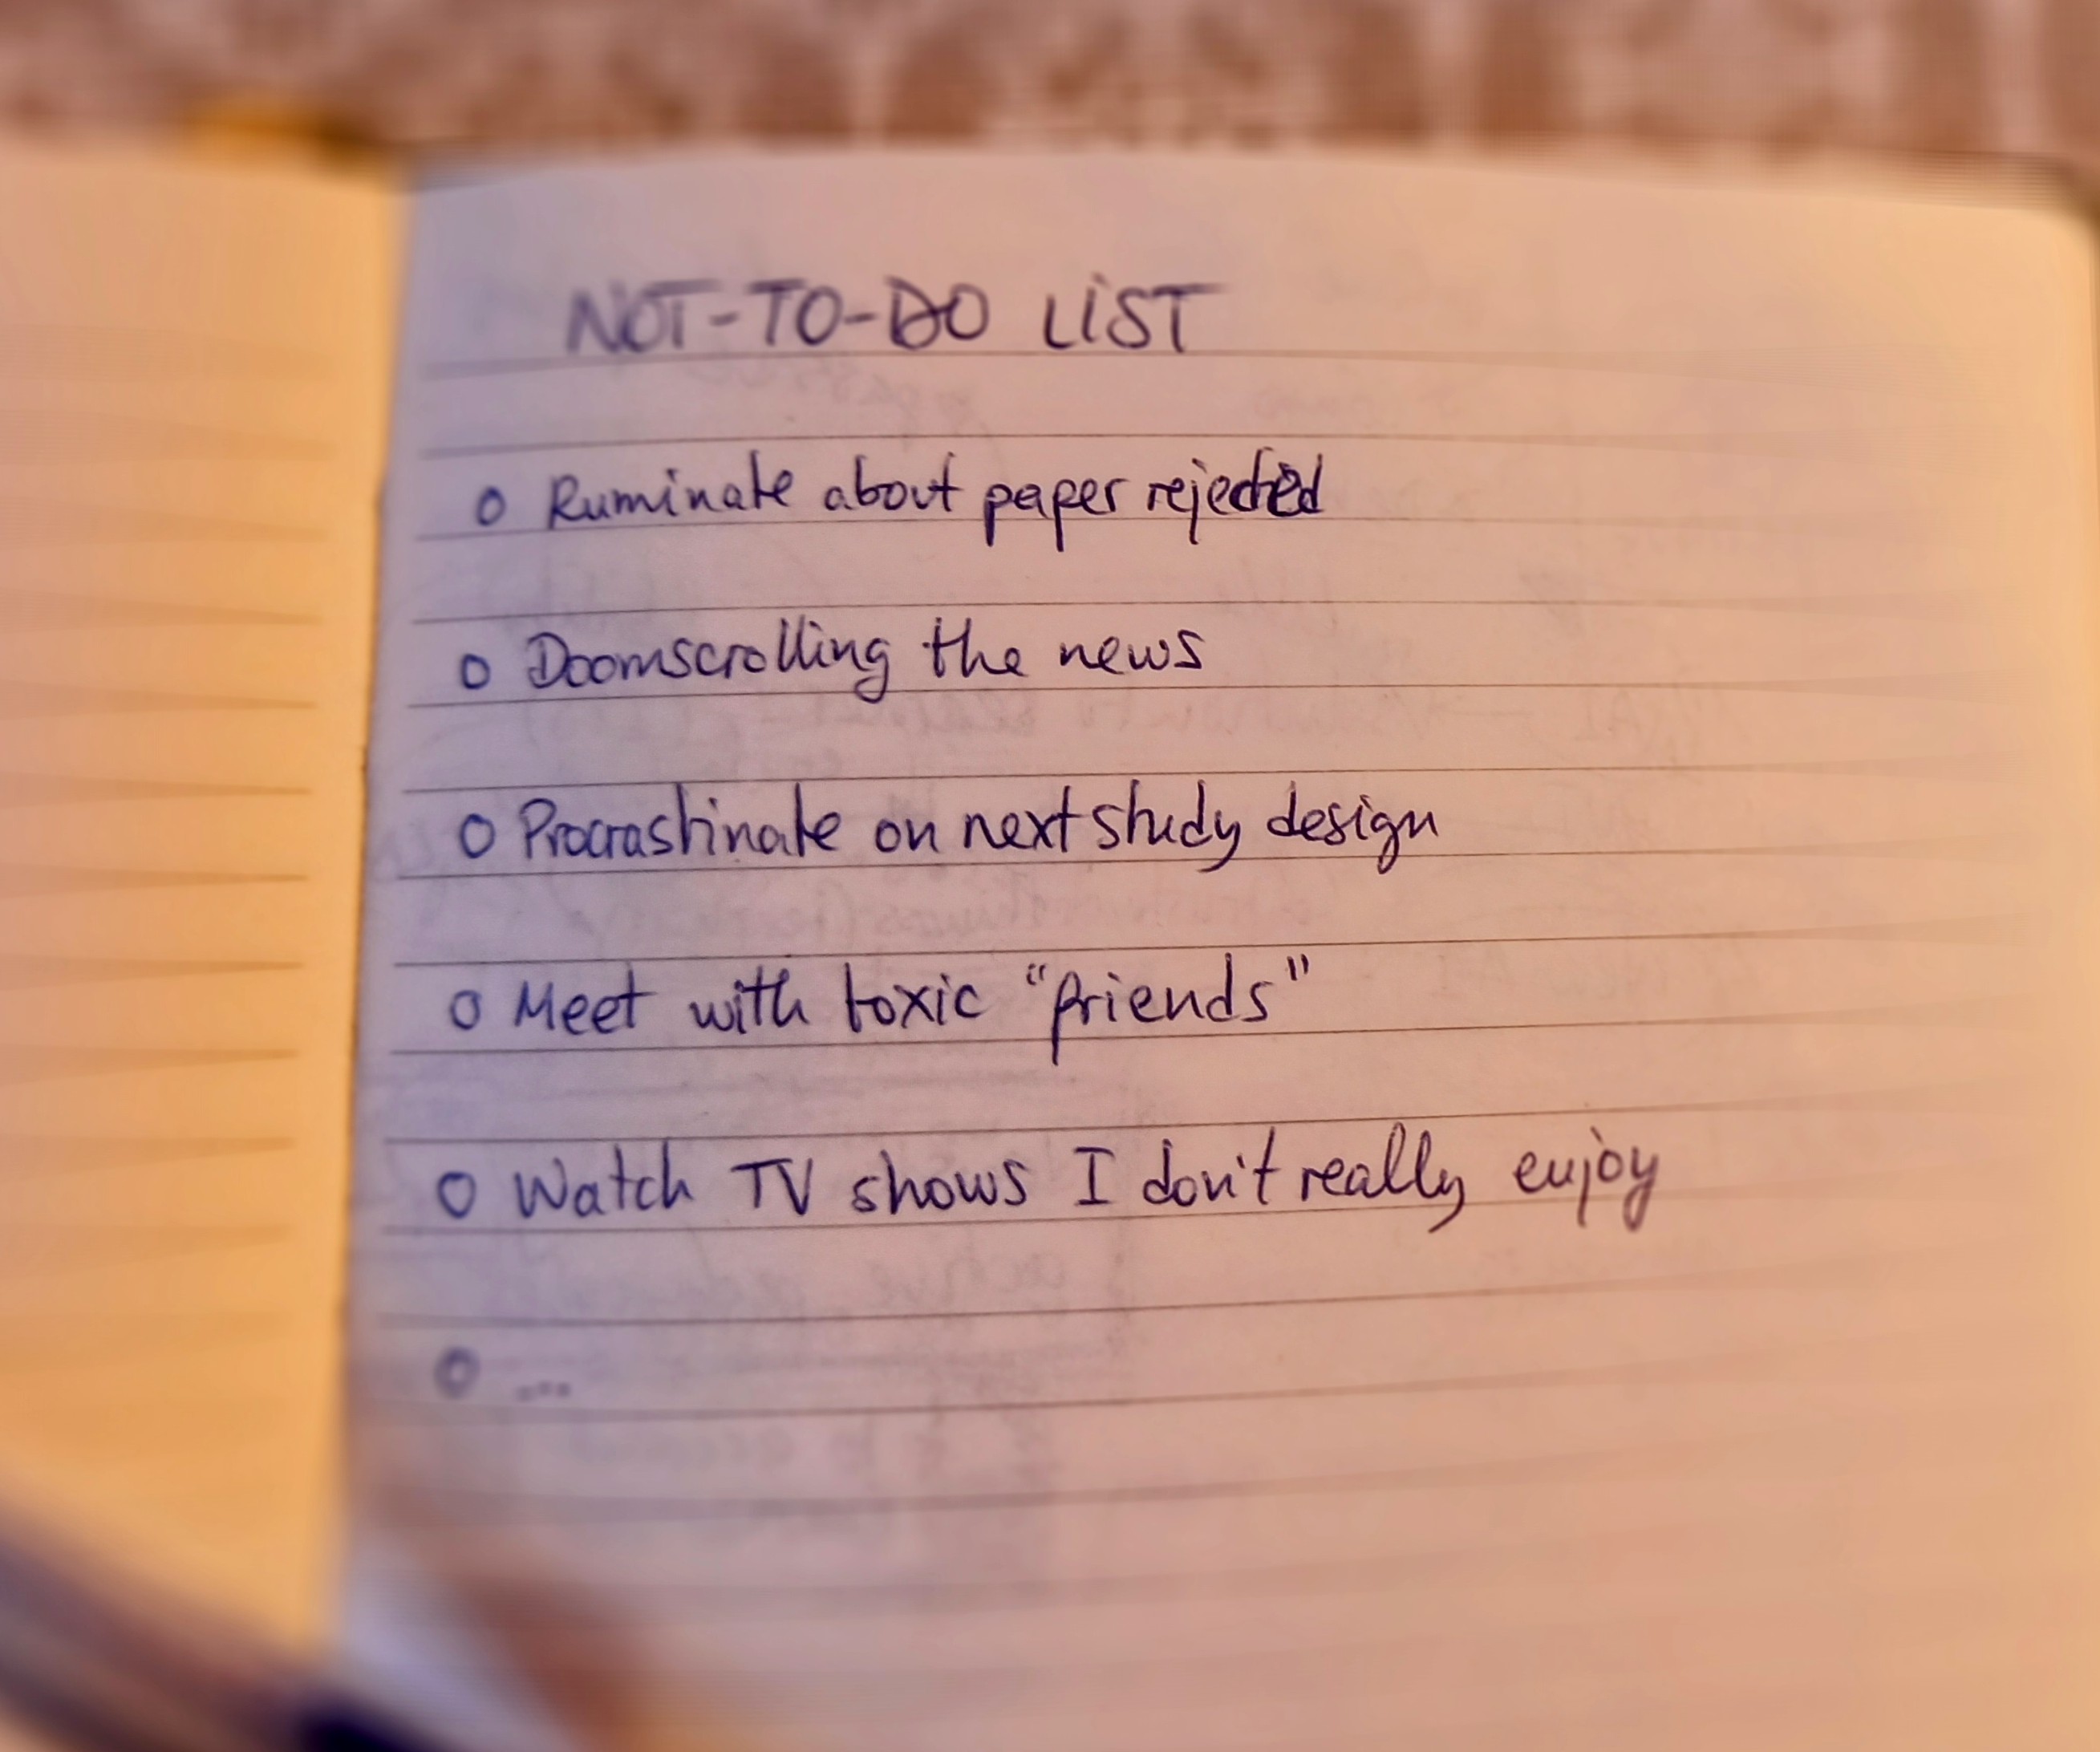 A not-to-do list